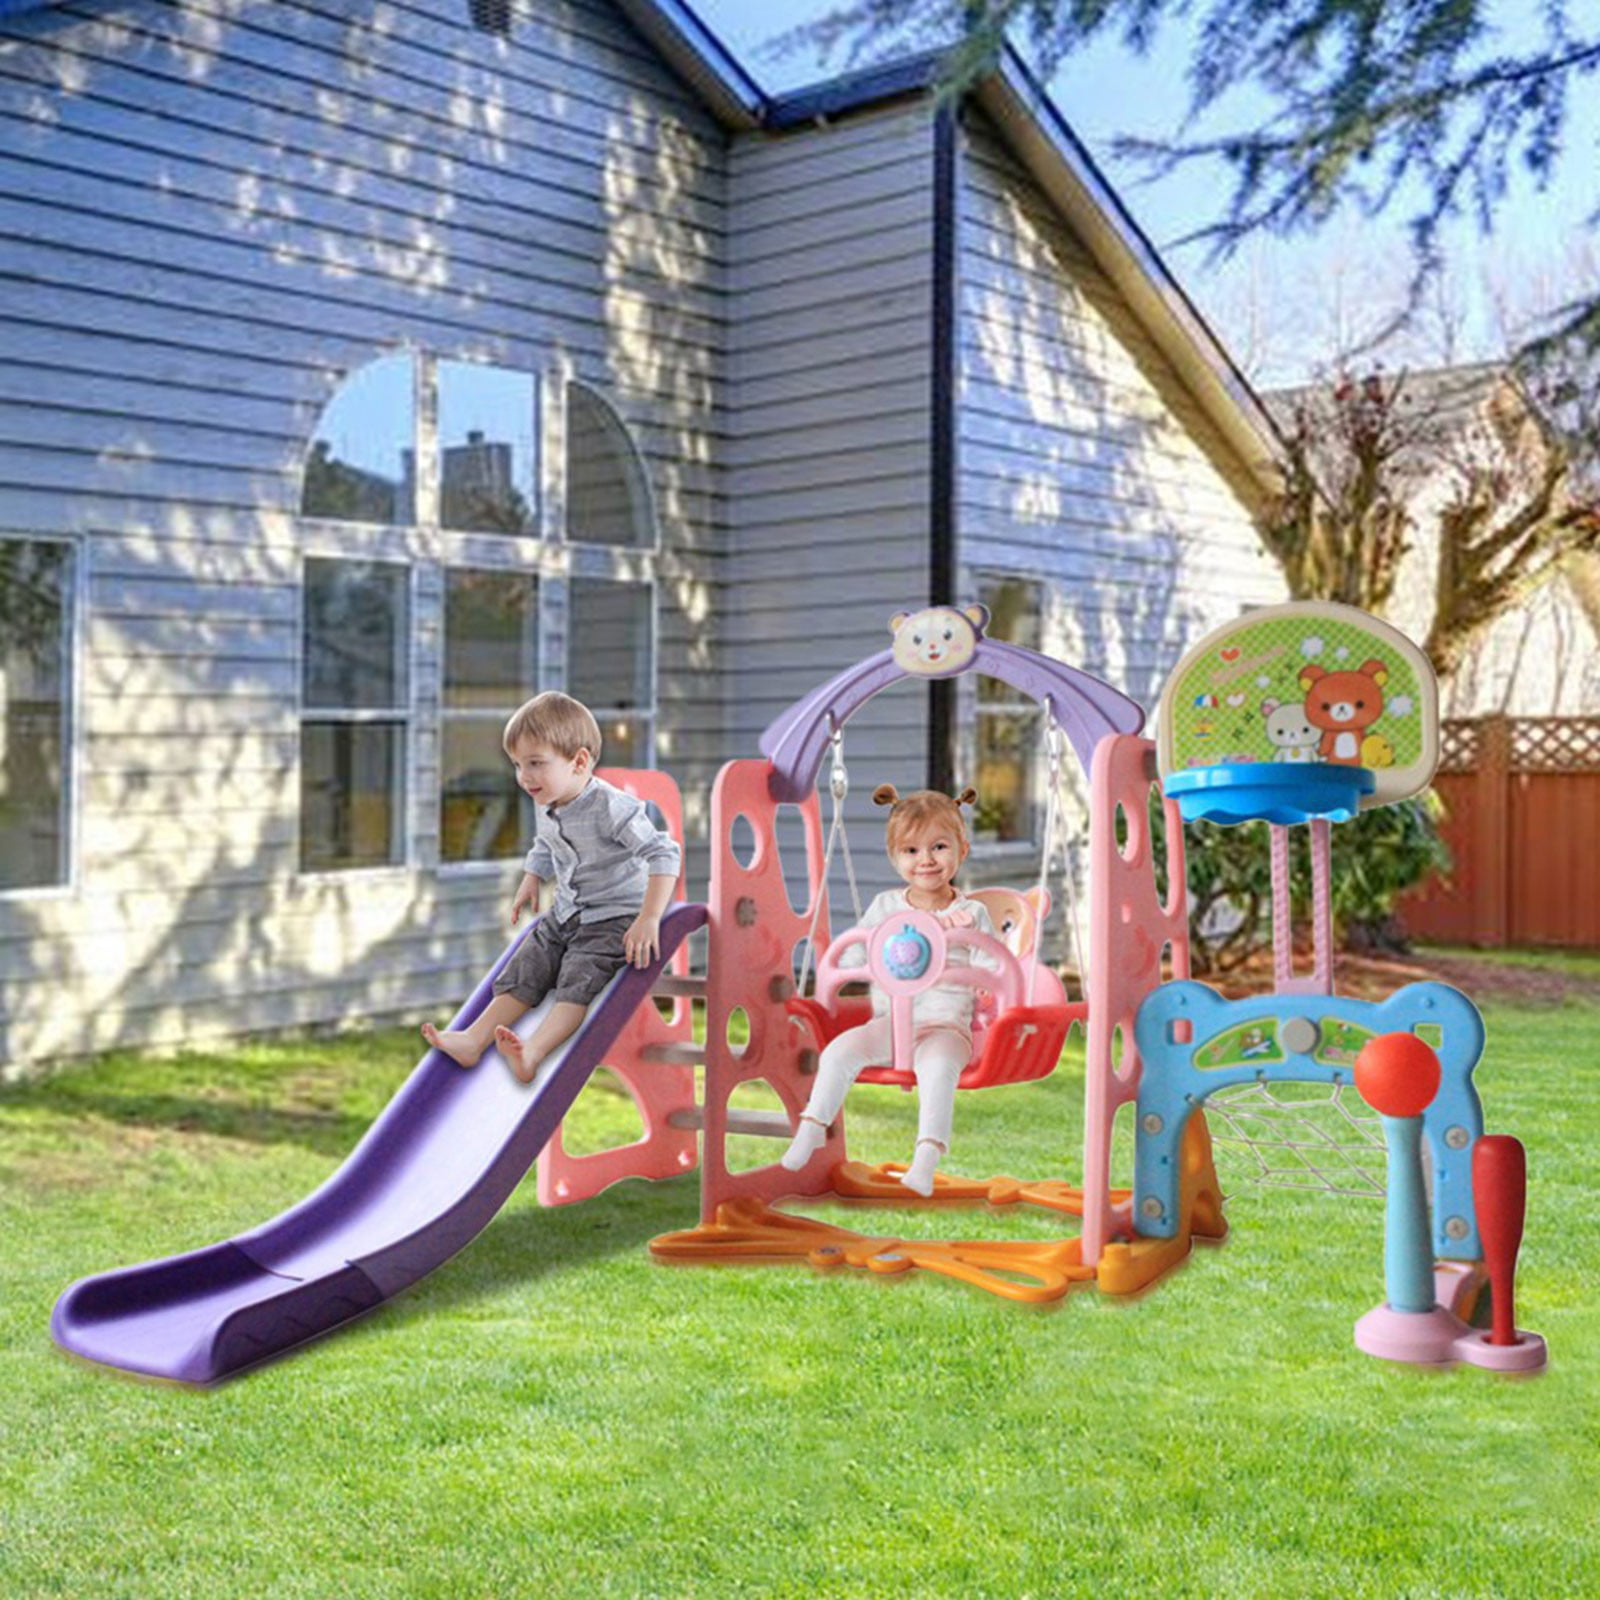 Details about   6 In 1 Kids Indoor/Outdoor Slide Swing And Basketball Football Baseball Set USA 